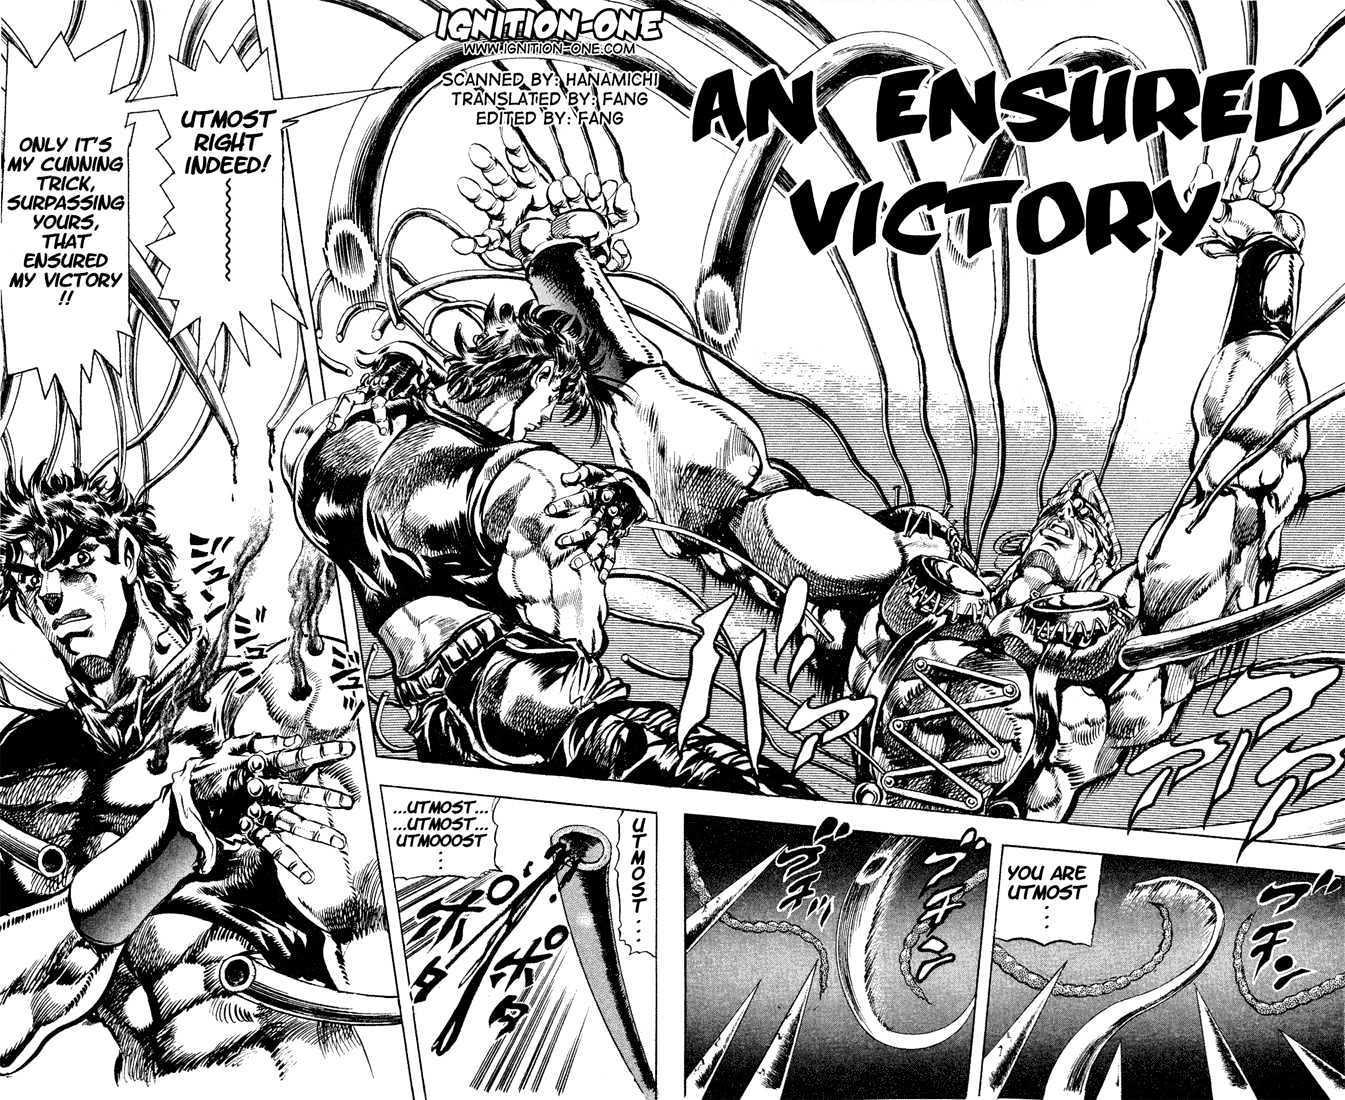 Jojo's Bizarre Adventure Vol.9 Chapter 80 : An Ensured Victory page 2 - 